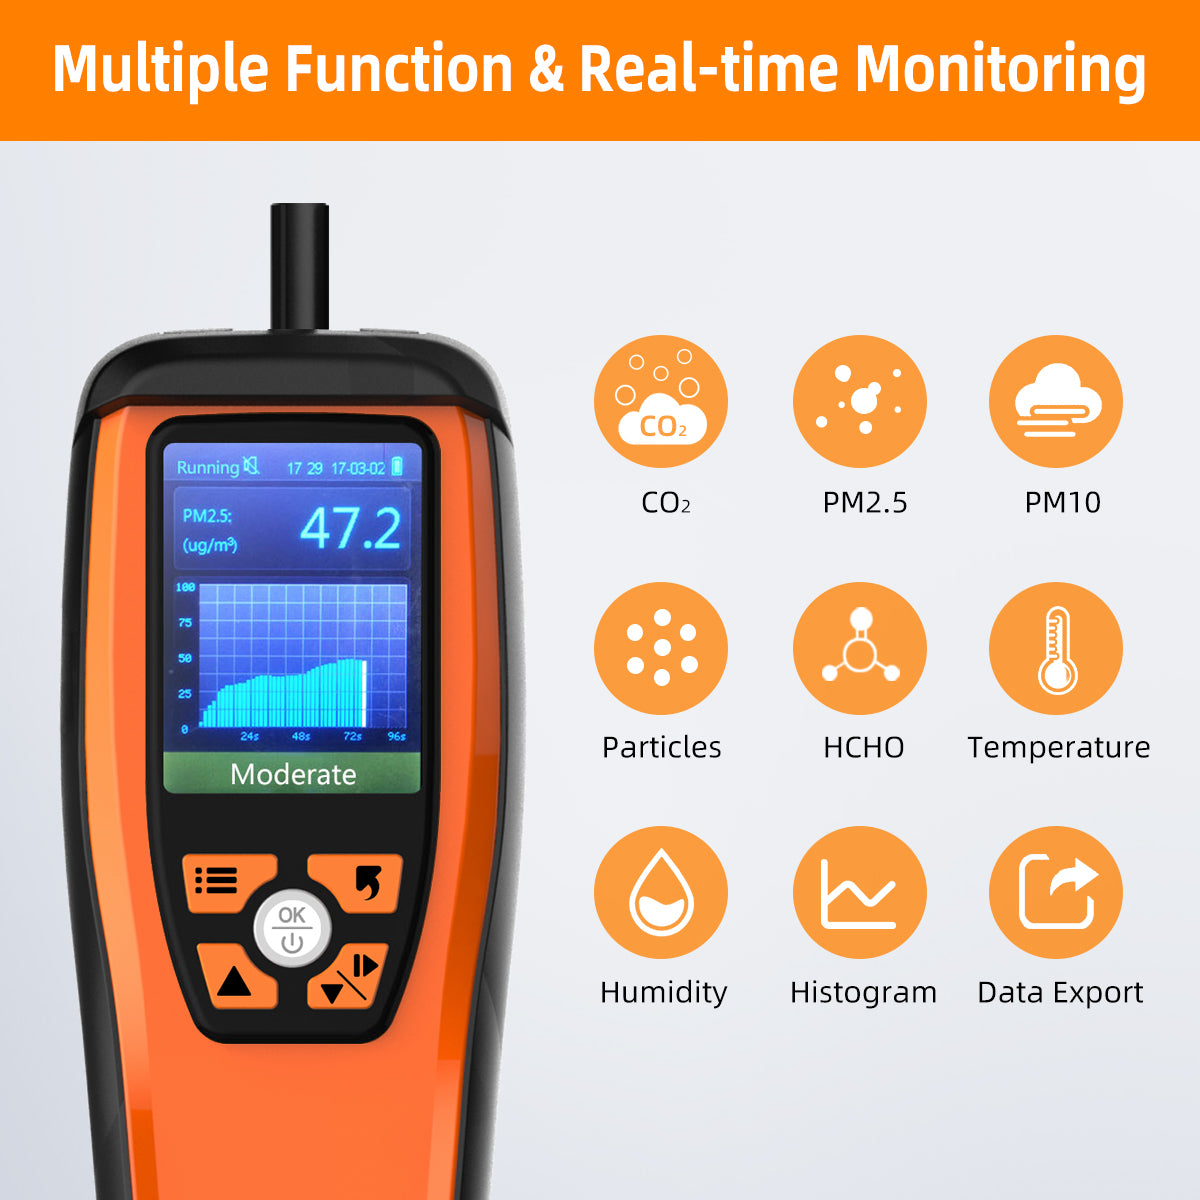 Temtop M2000 2nd CO2 Air Quality Monitor for PM2.5 PM10 Particles CO2 HCHO, Temperature & Humidity Display, Data Export